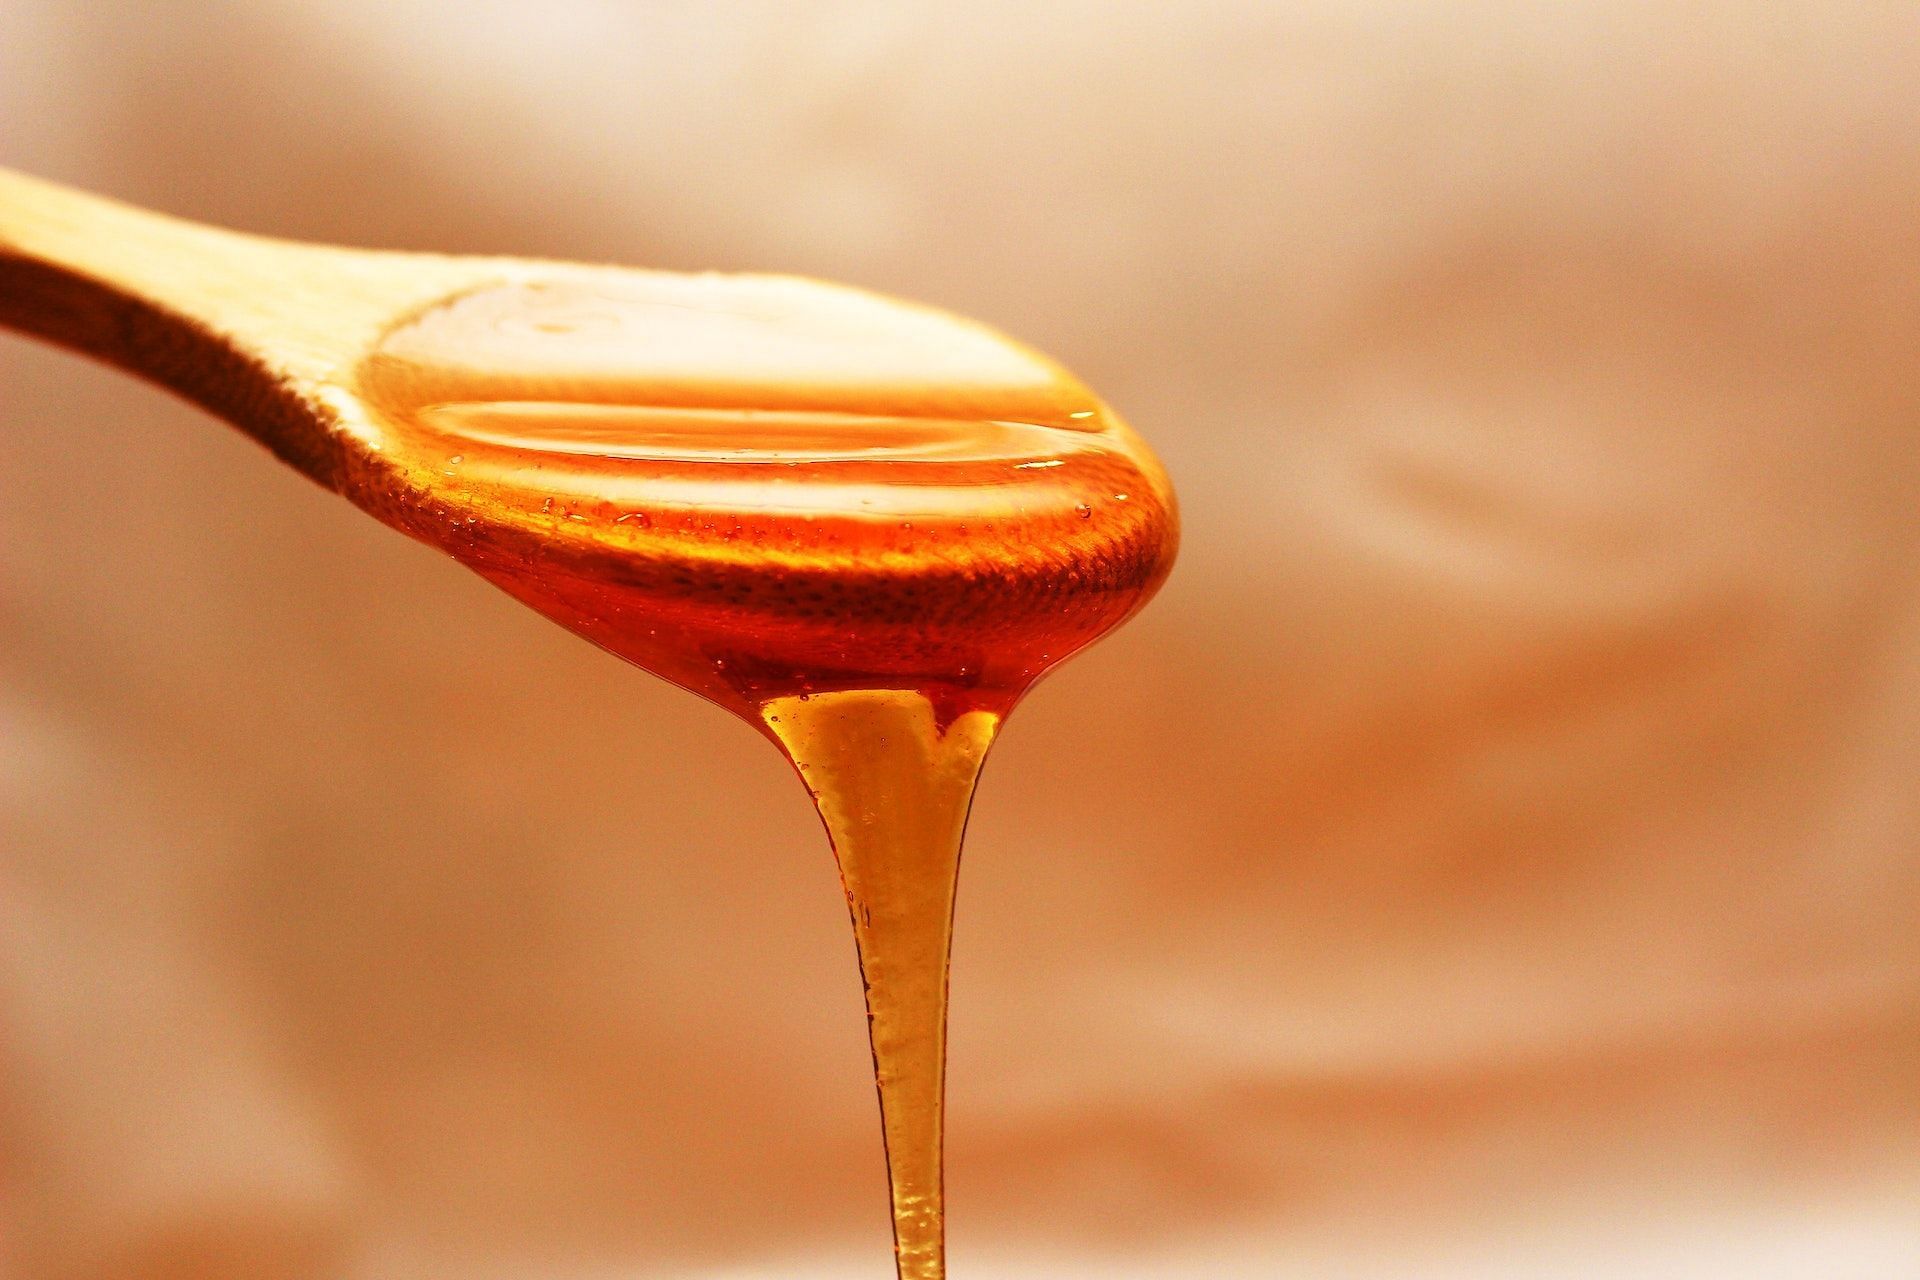 Honey has antimicrobial properties that acts as a good treatment for cracked heels. (Photo via Pexels/Pixabay)